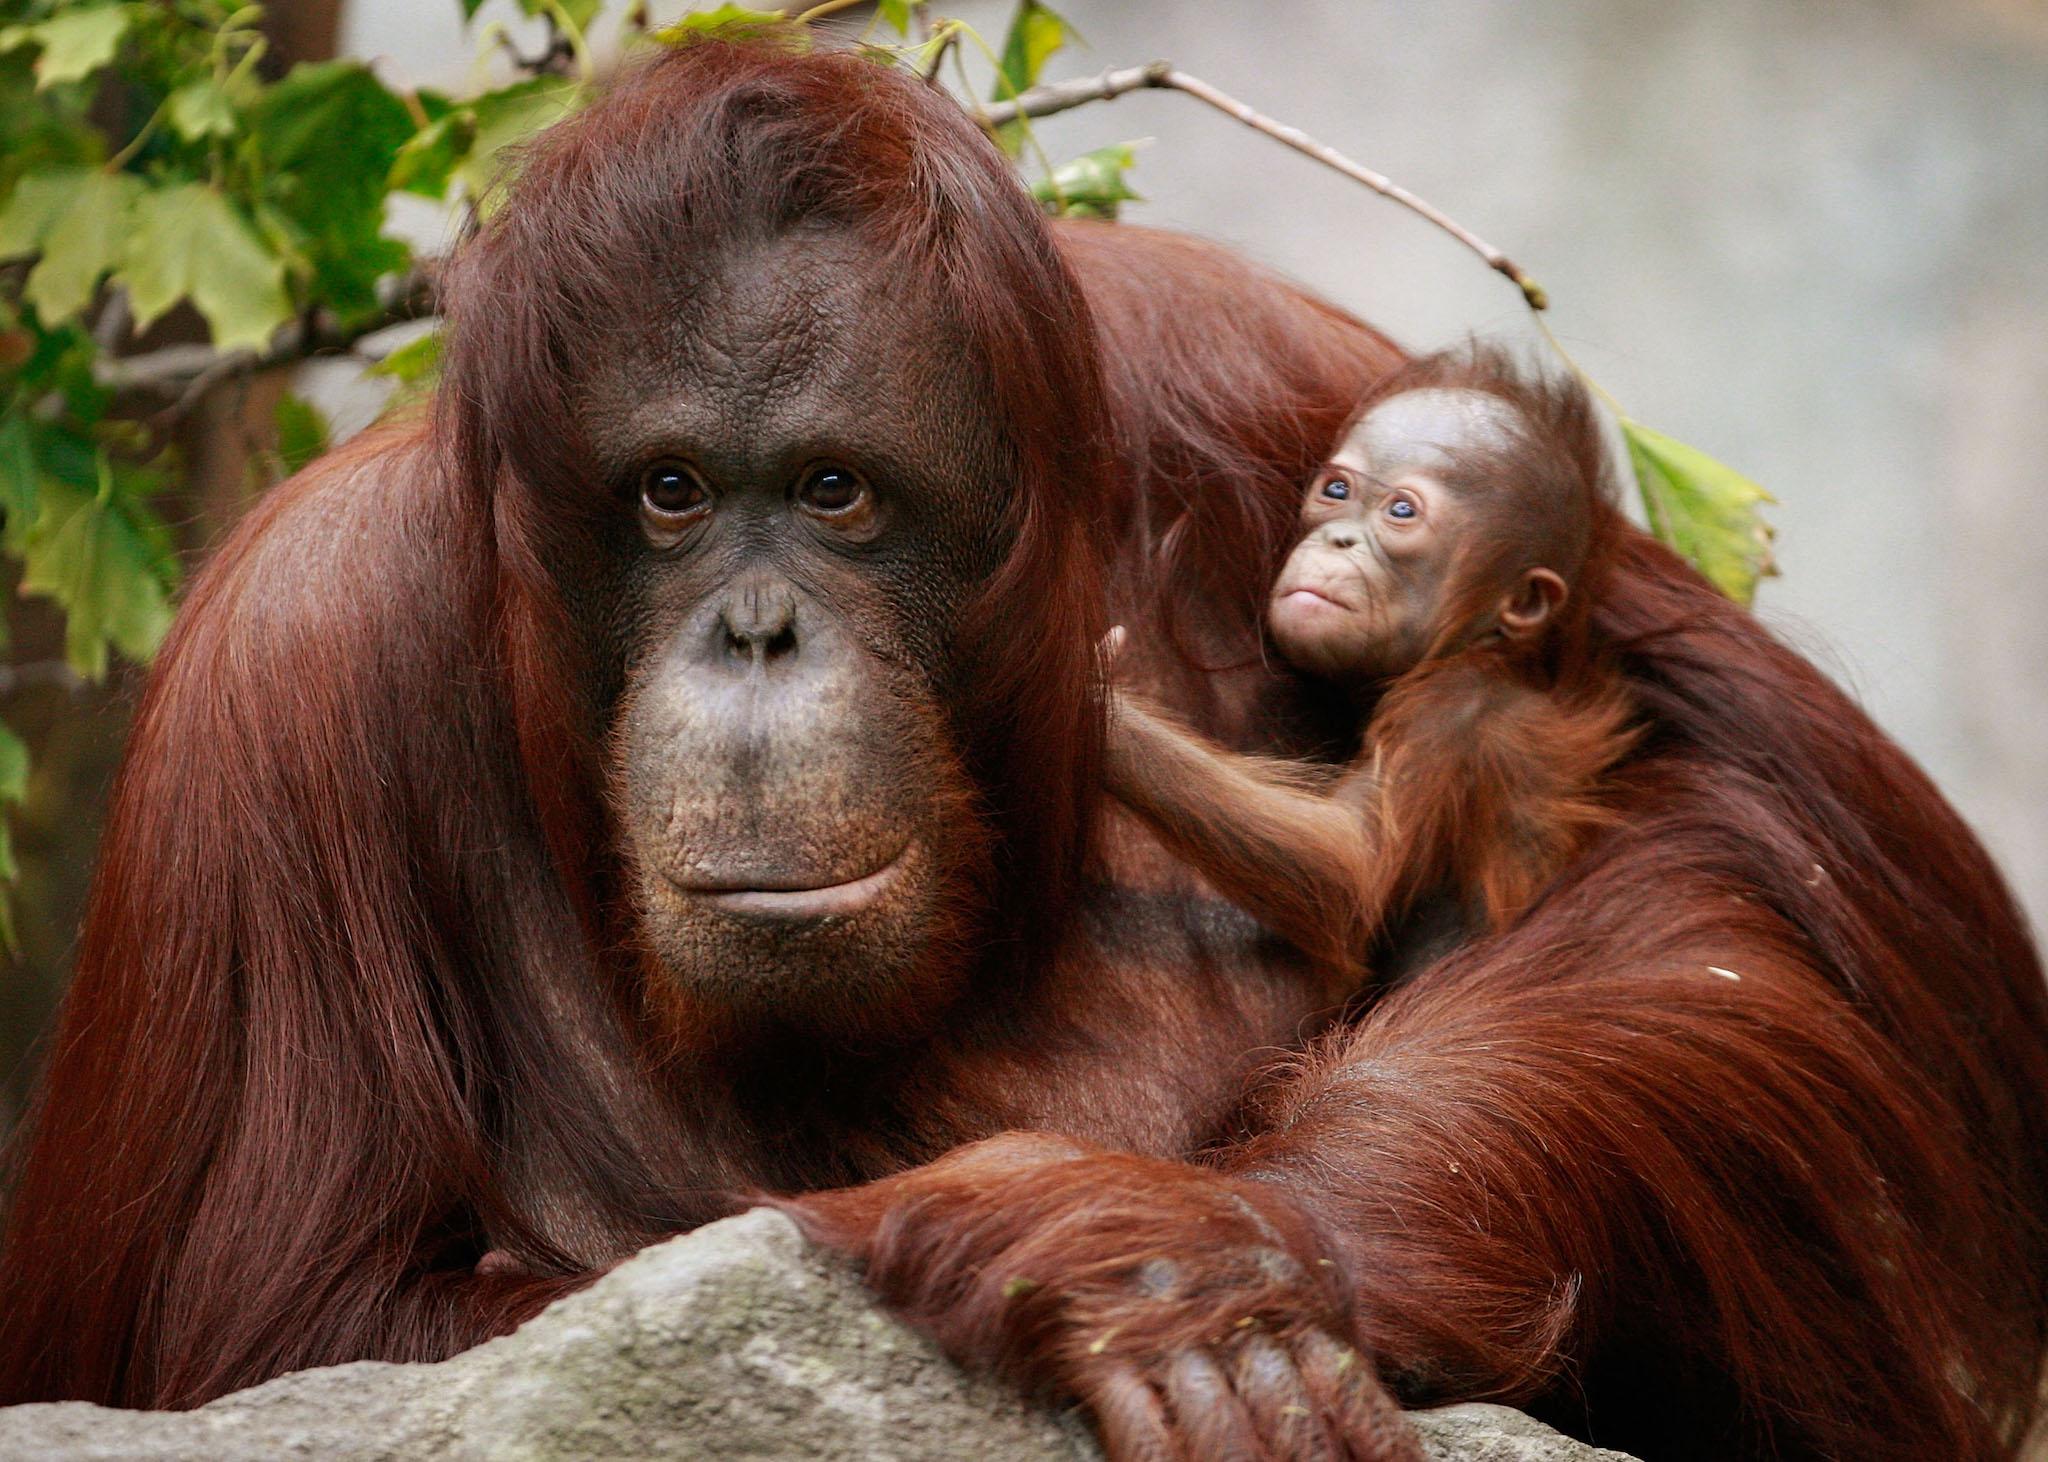 The Bornean orangutan’s survival is dependent on forging successful alliances with logging companies and other industries and raising public awareness of the issue